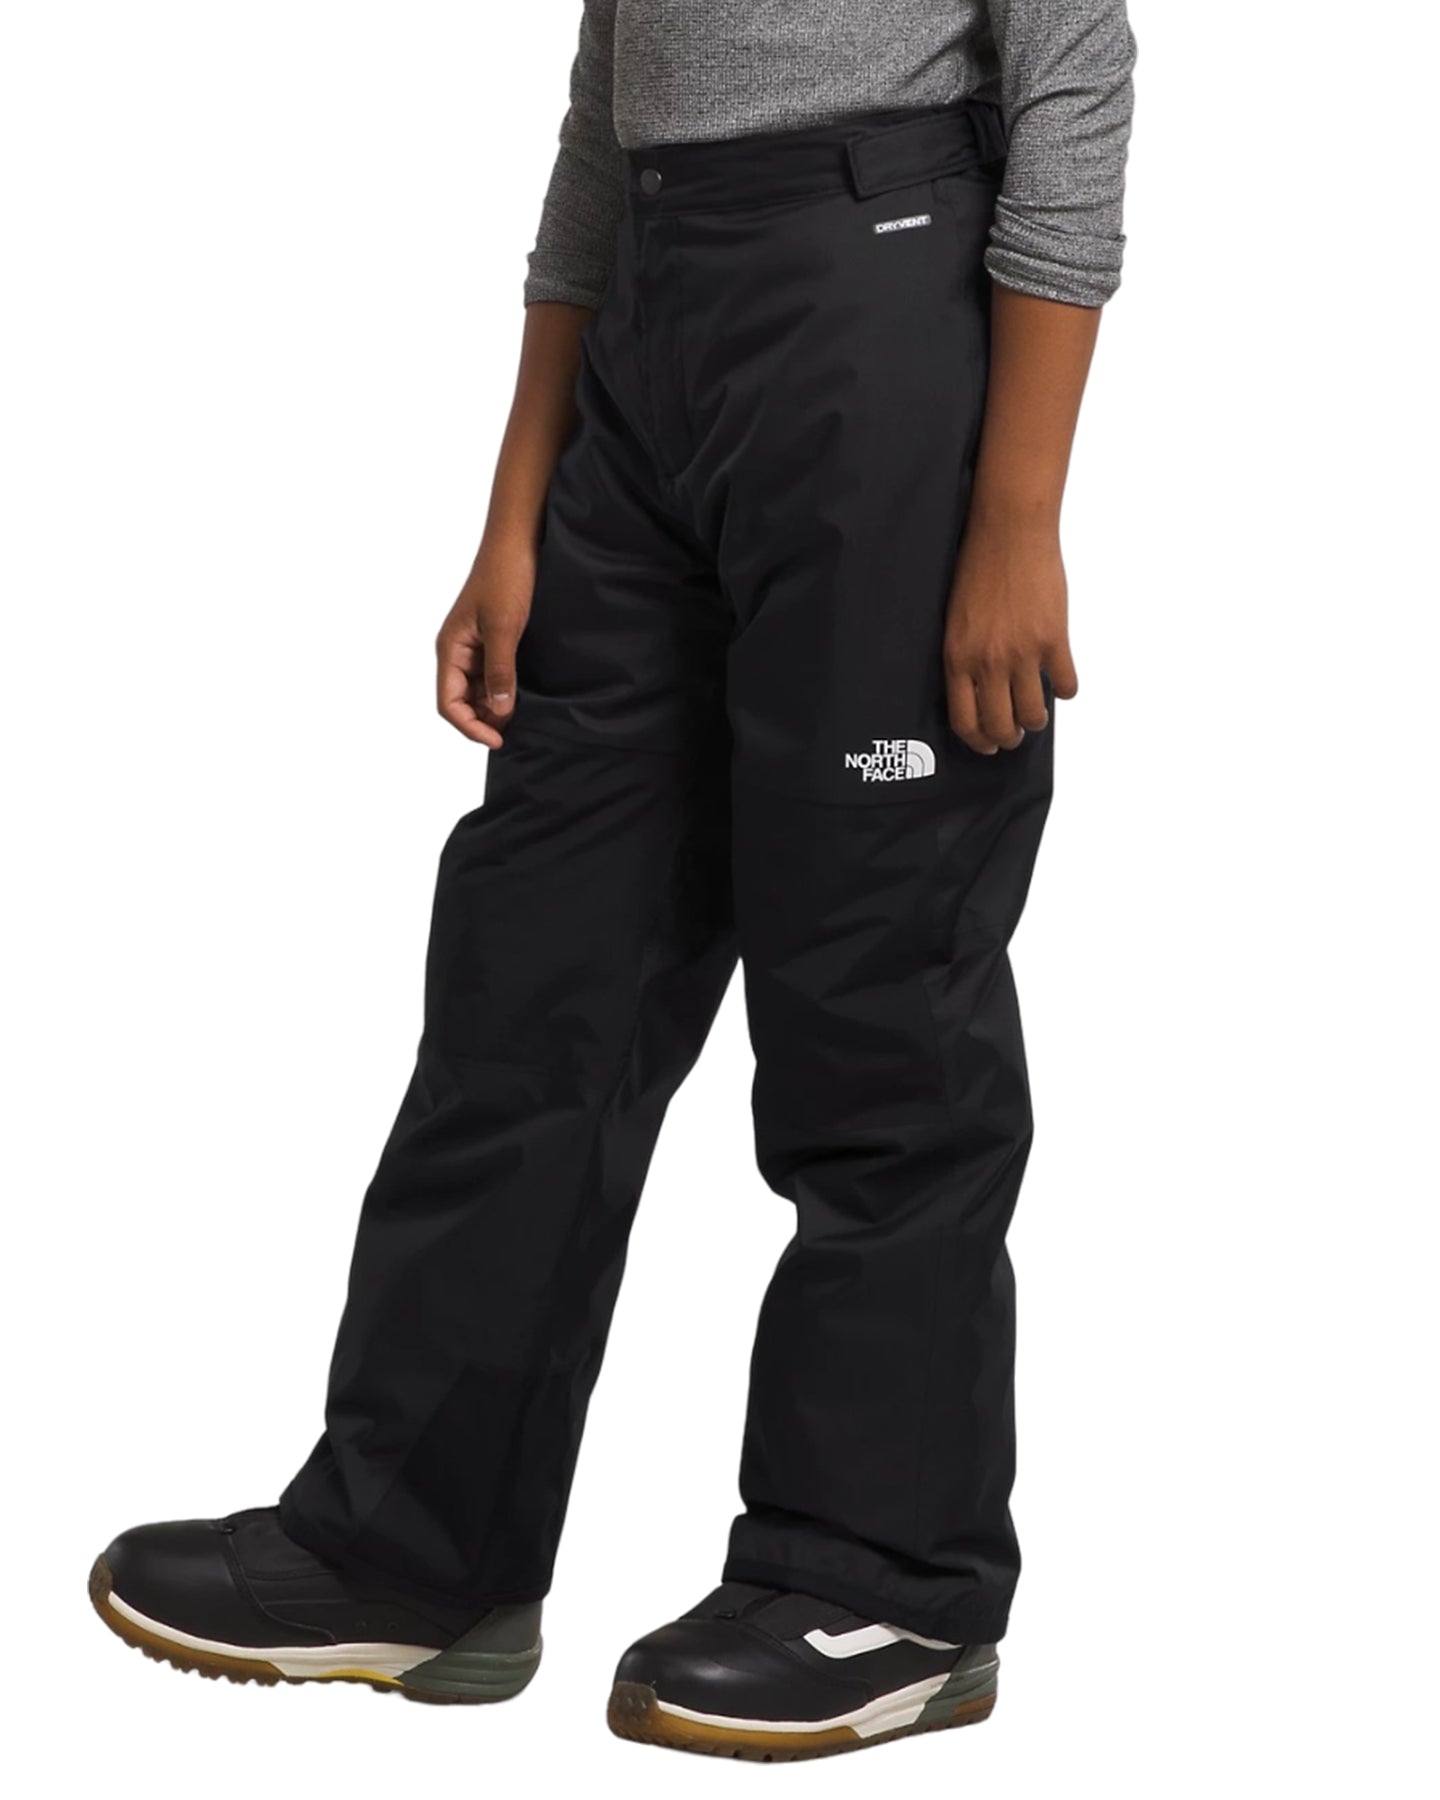 The North Face Boys' Freedom Insulated Snow Pants - Tnf Black Kids' Snow Pants - SnowSkiersWarehouse